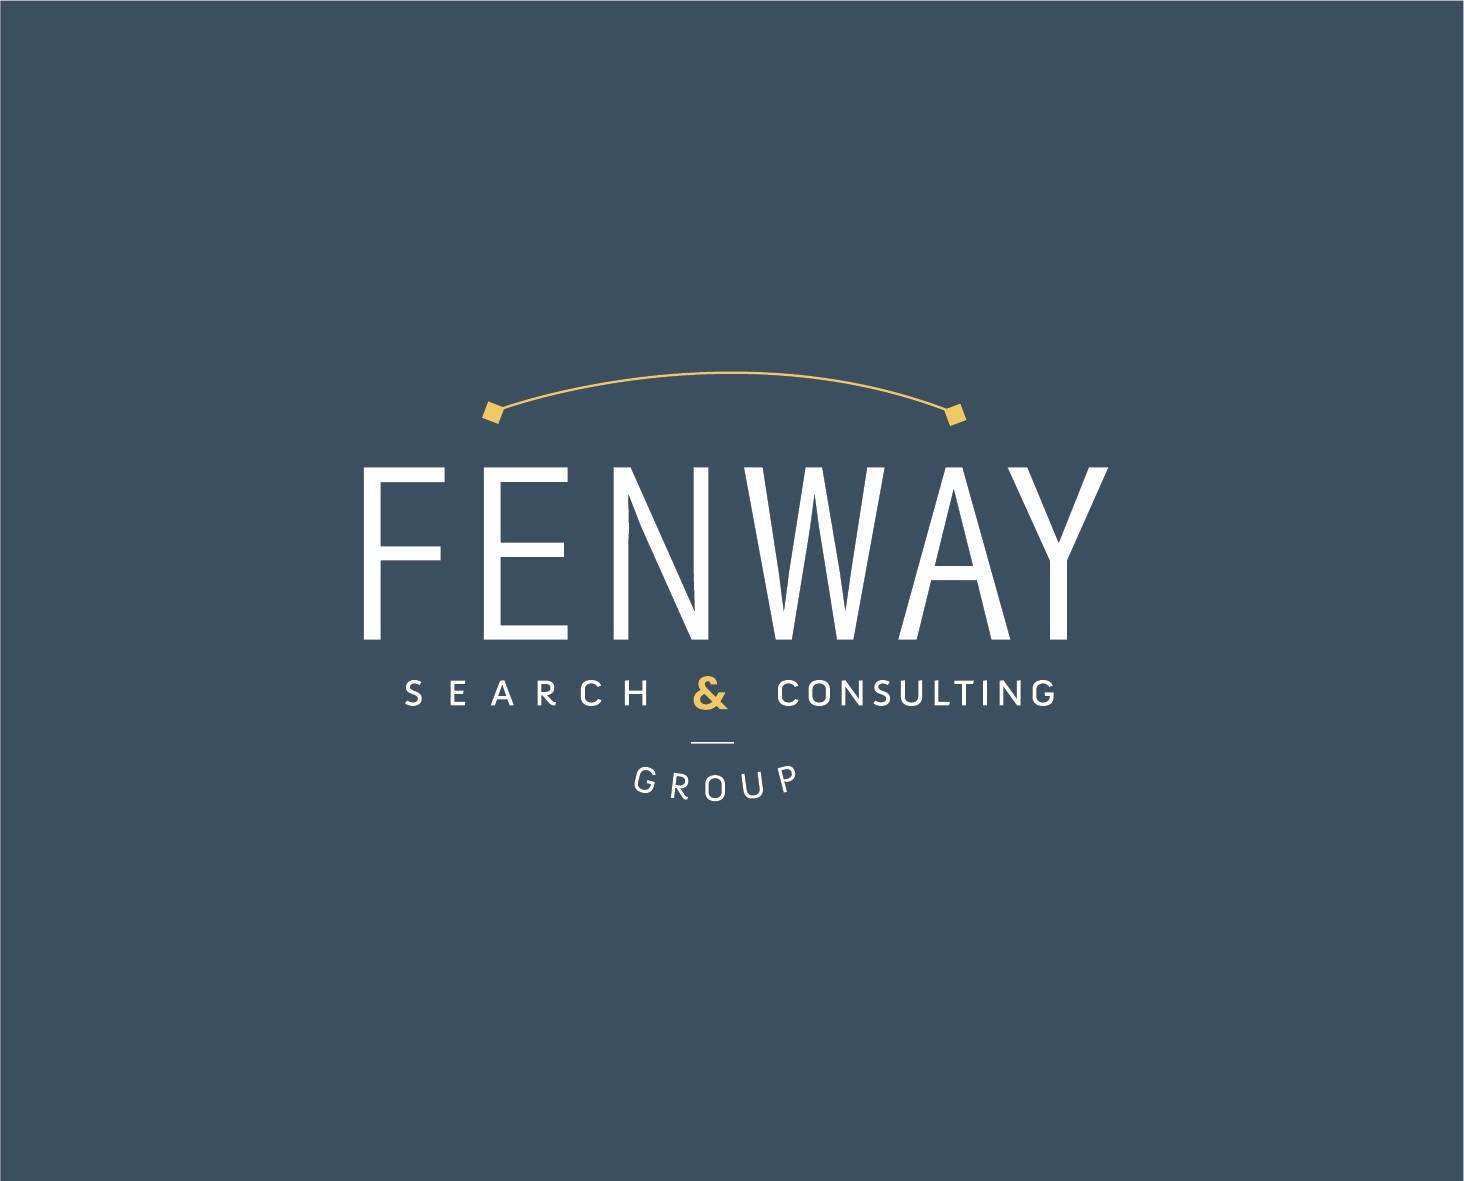 fenway search and consulting